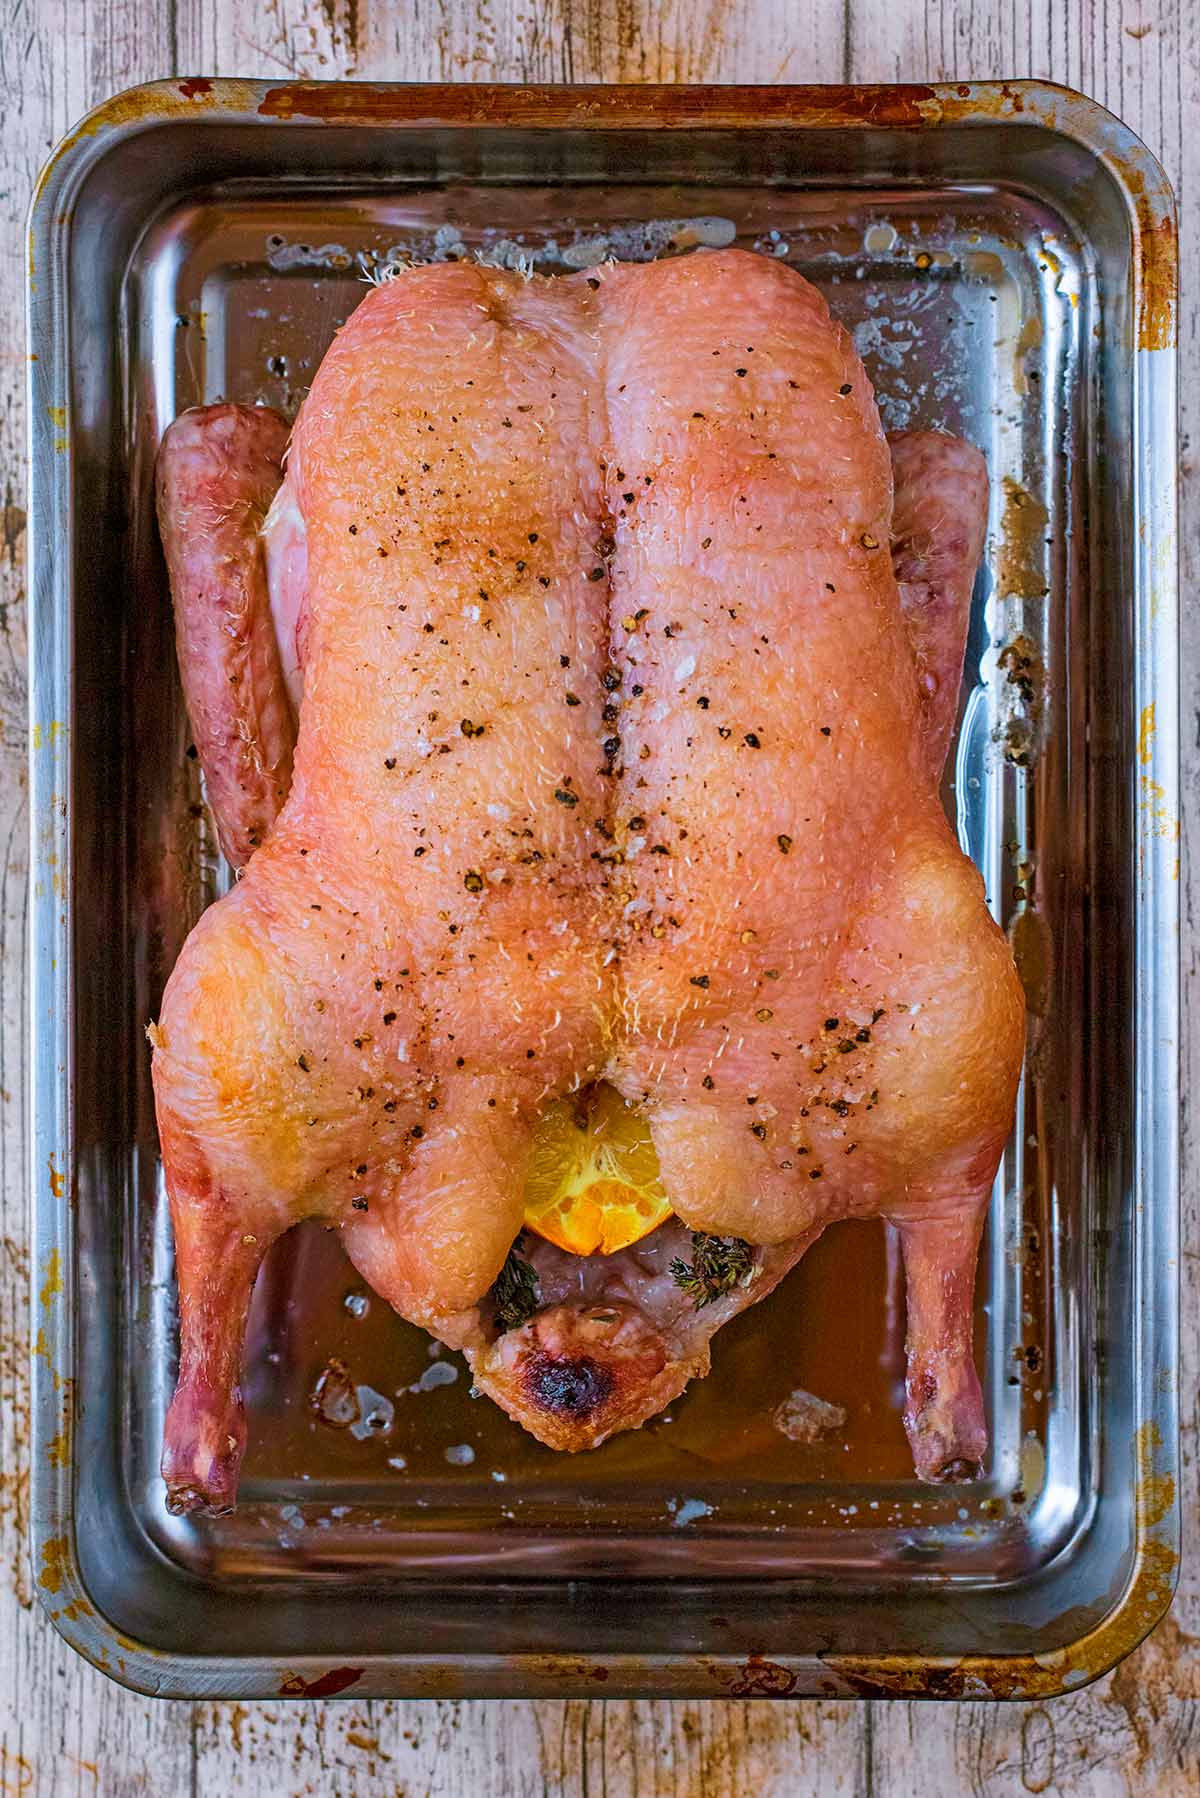 A whole, partly cooked, duck in a roasting pan.